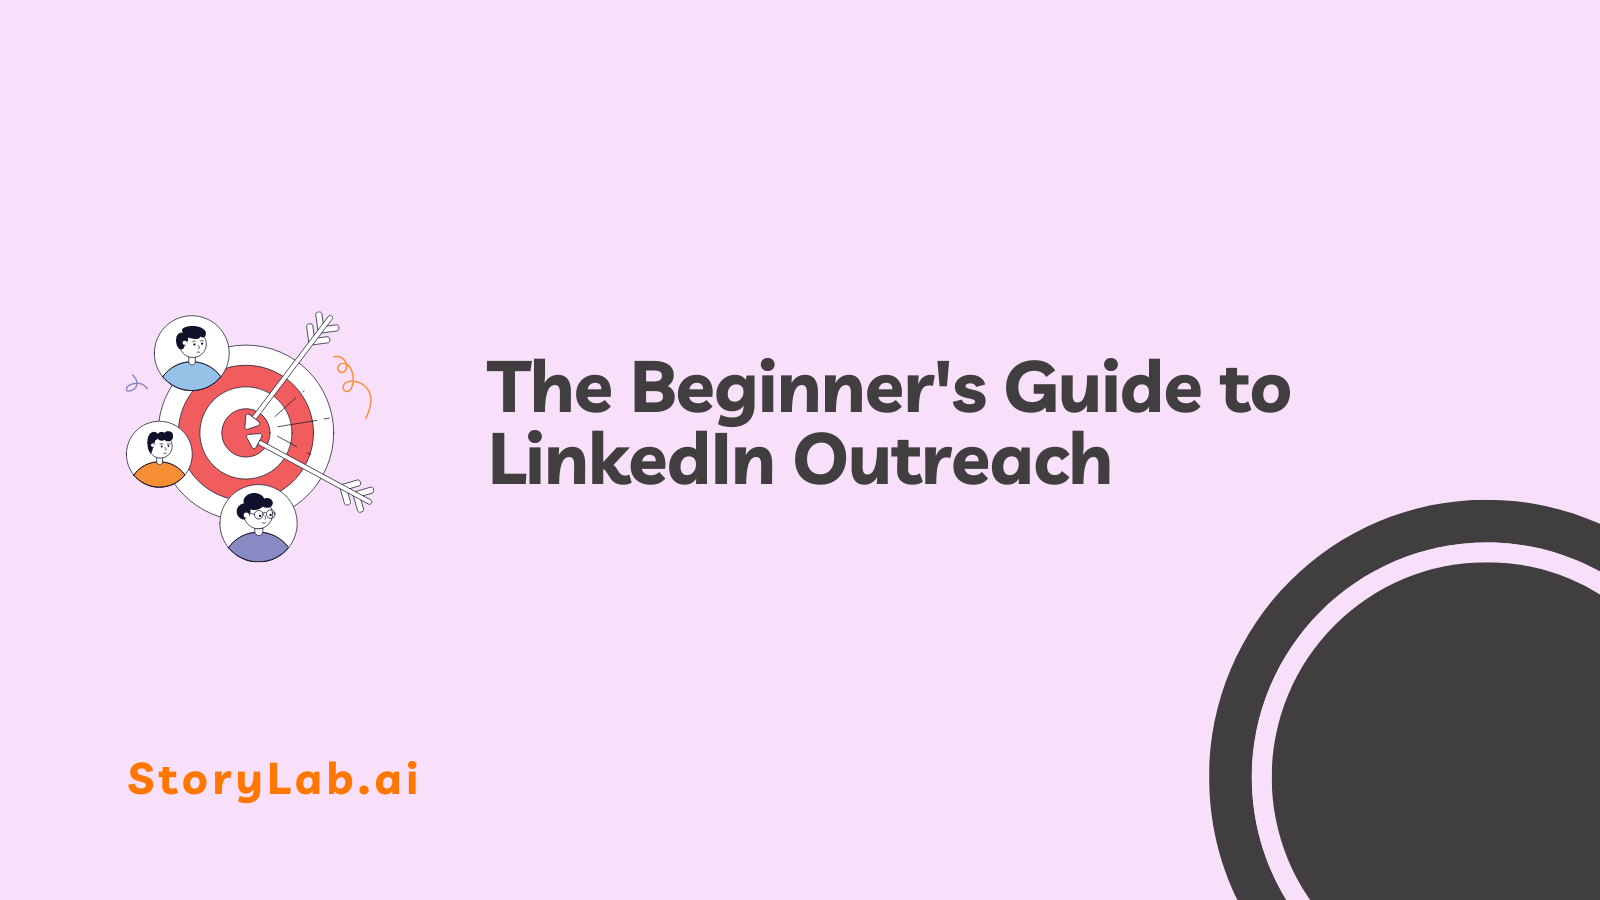 The Beginner's Guide to LinkedIn Outreach